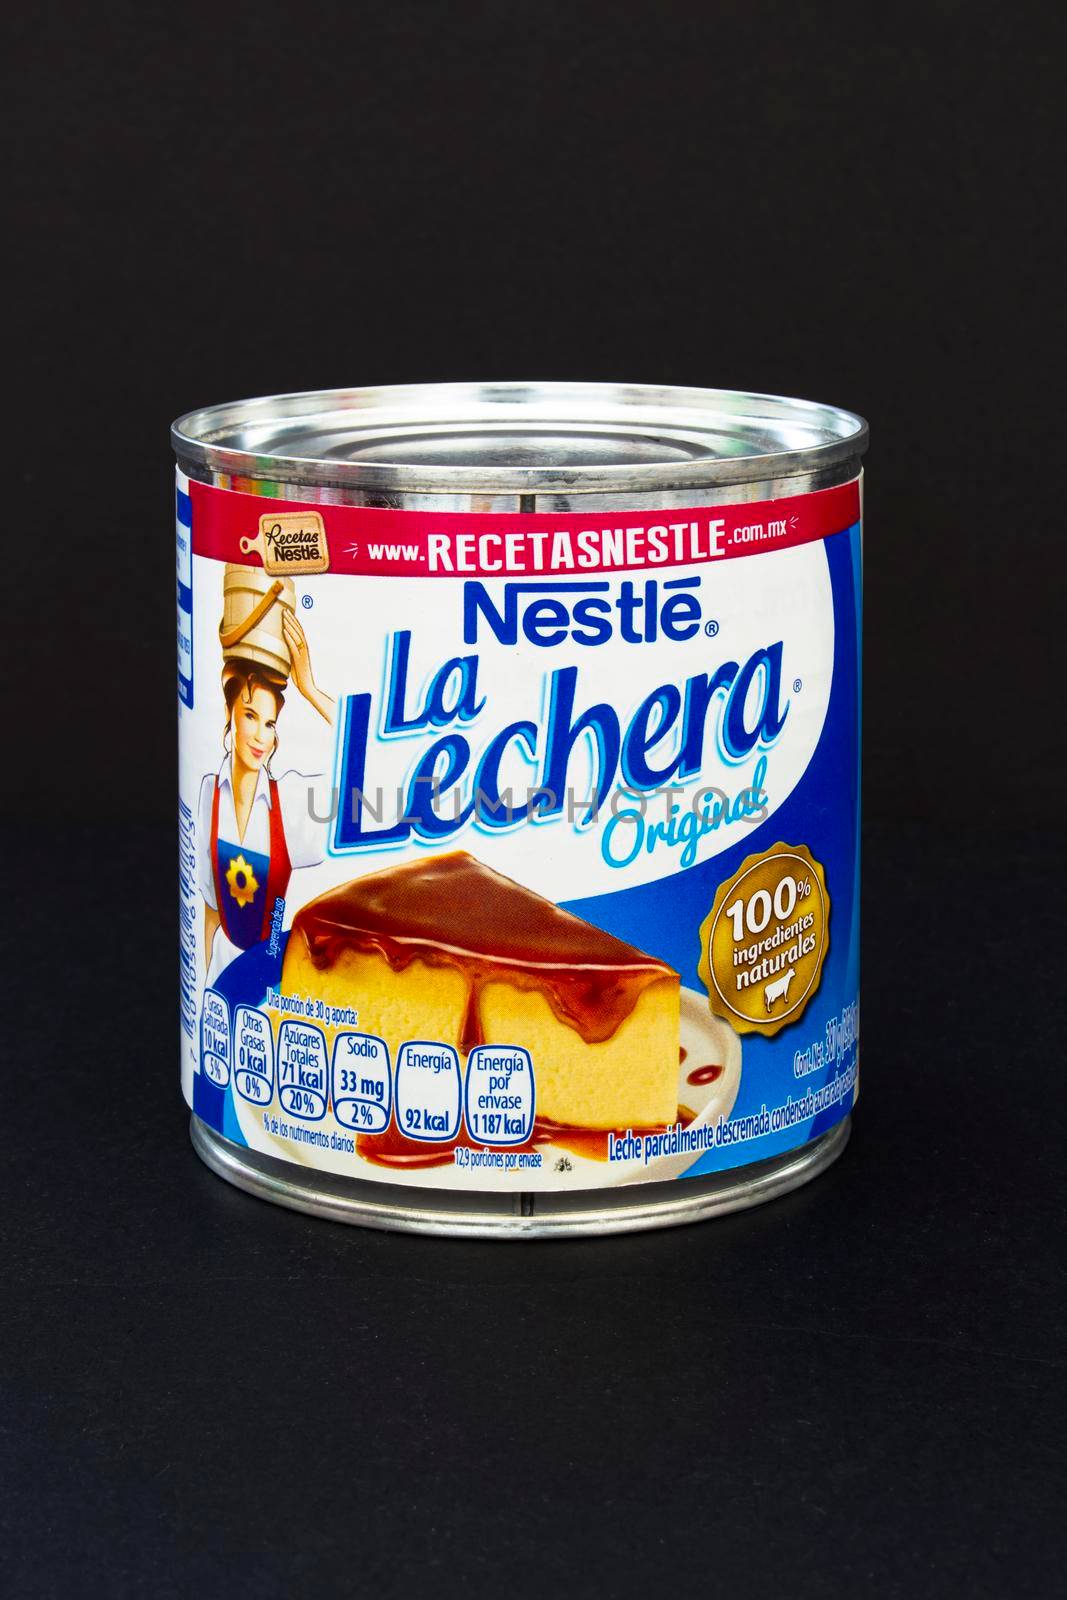 Calgary, Alberta, Canada. April 14, 2021. La Lechera which means Milkmaid in Spanish, is a Nestlé brand, producing various dairy products. Sweetened condensed milk by oasisamuel